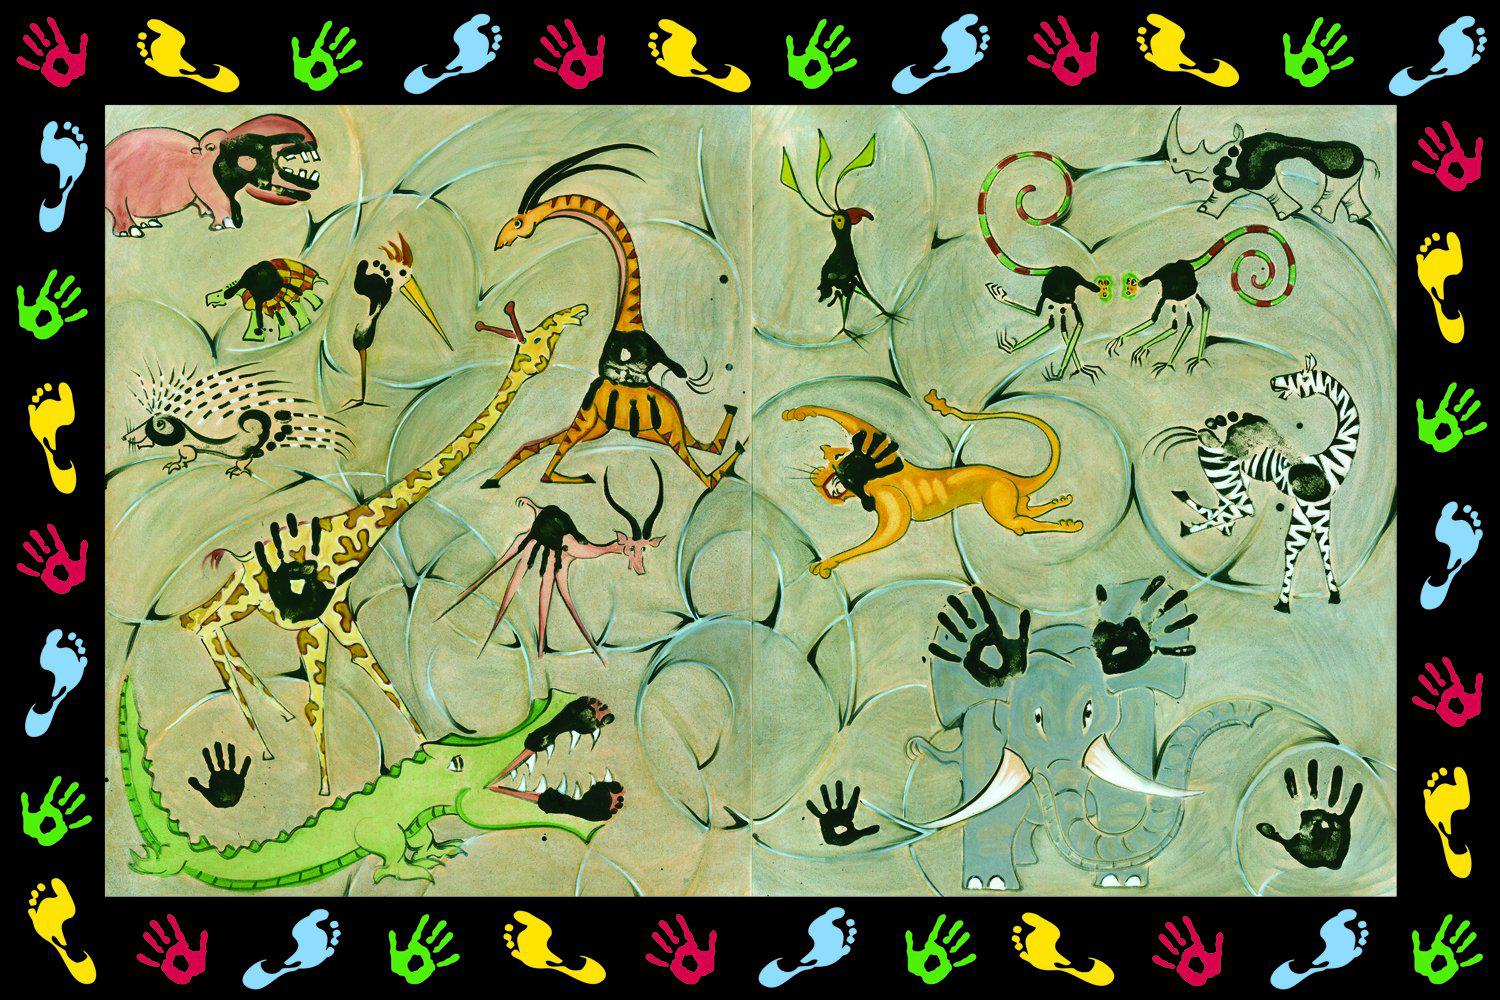 Fundex Games fundex monkey see monkey draw - cave painting - 36 pieces floor puzzle